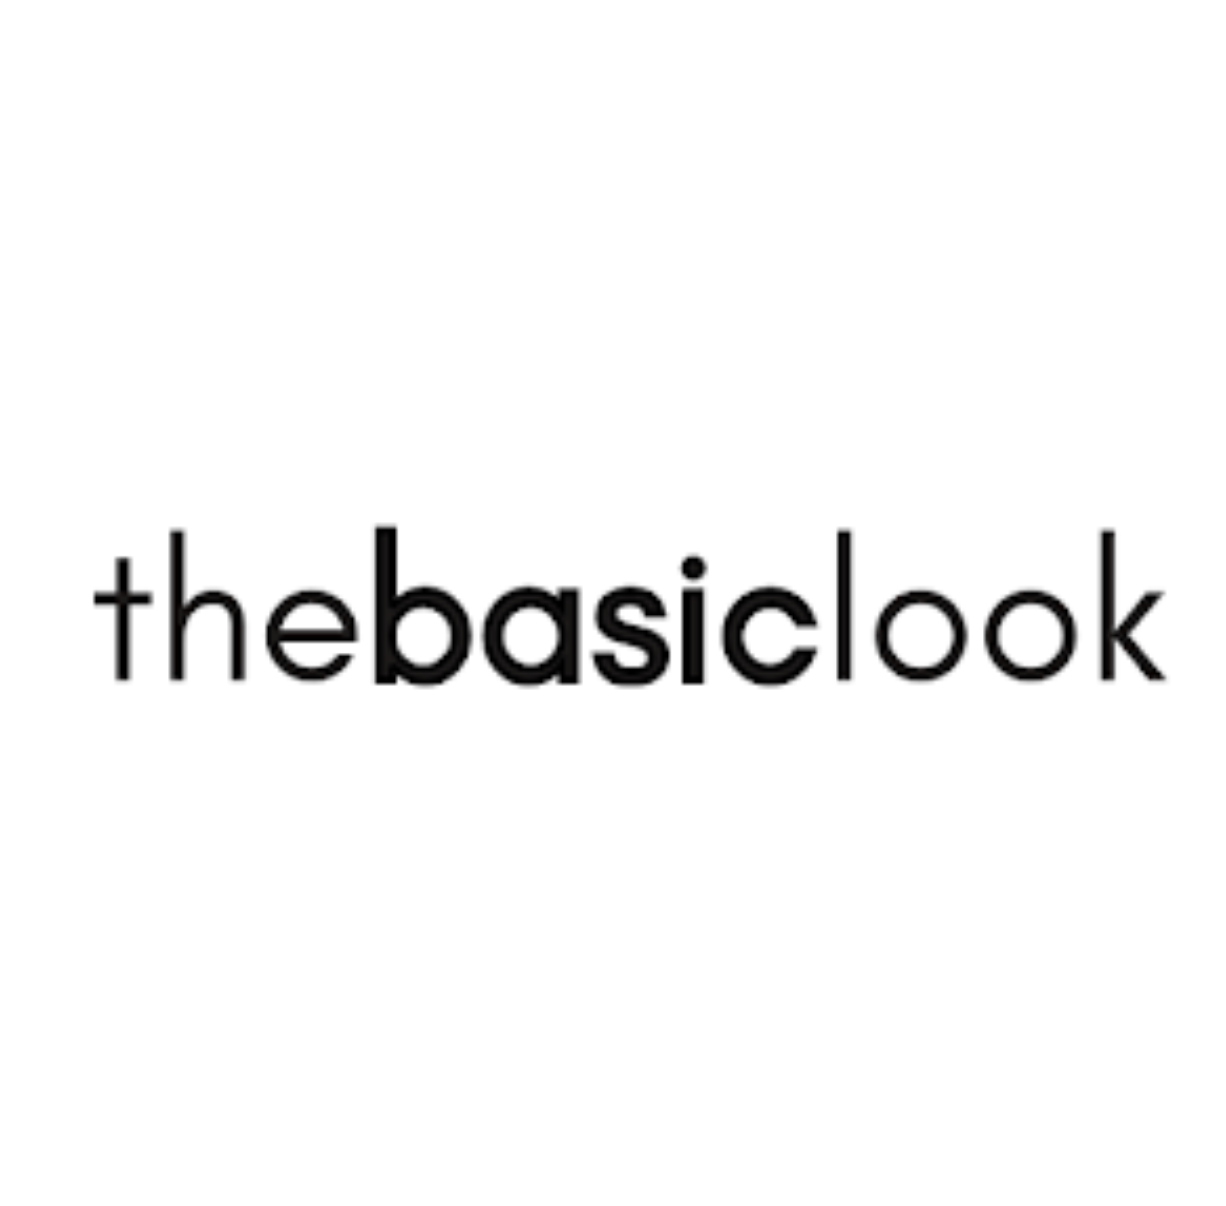 The Basic look brand